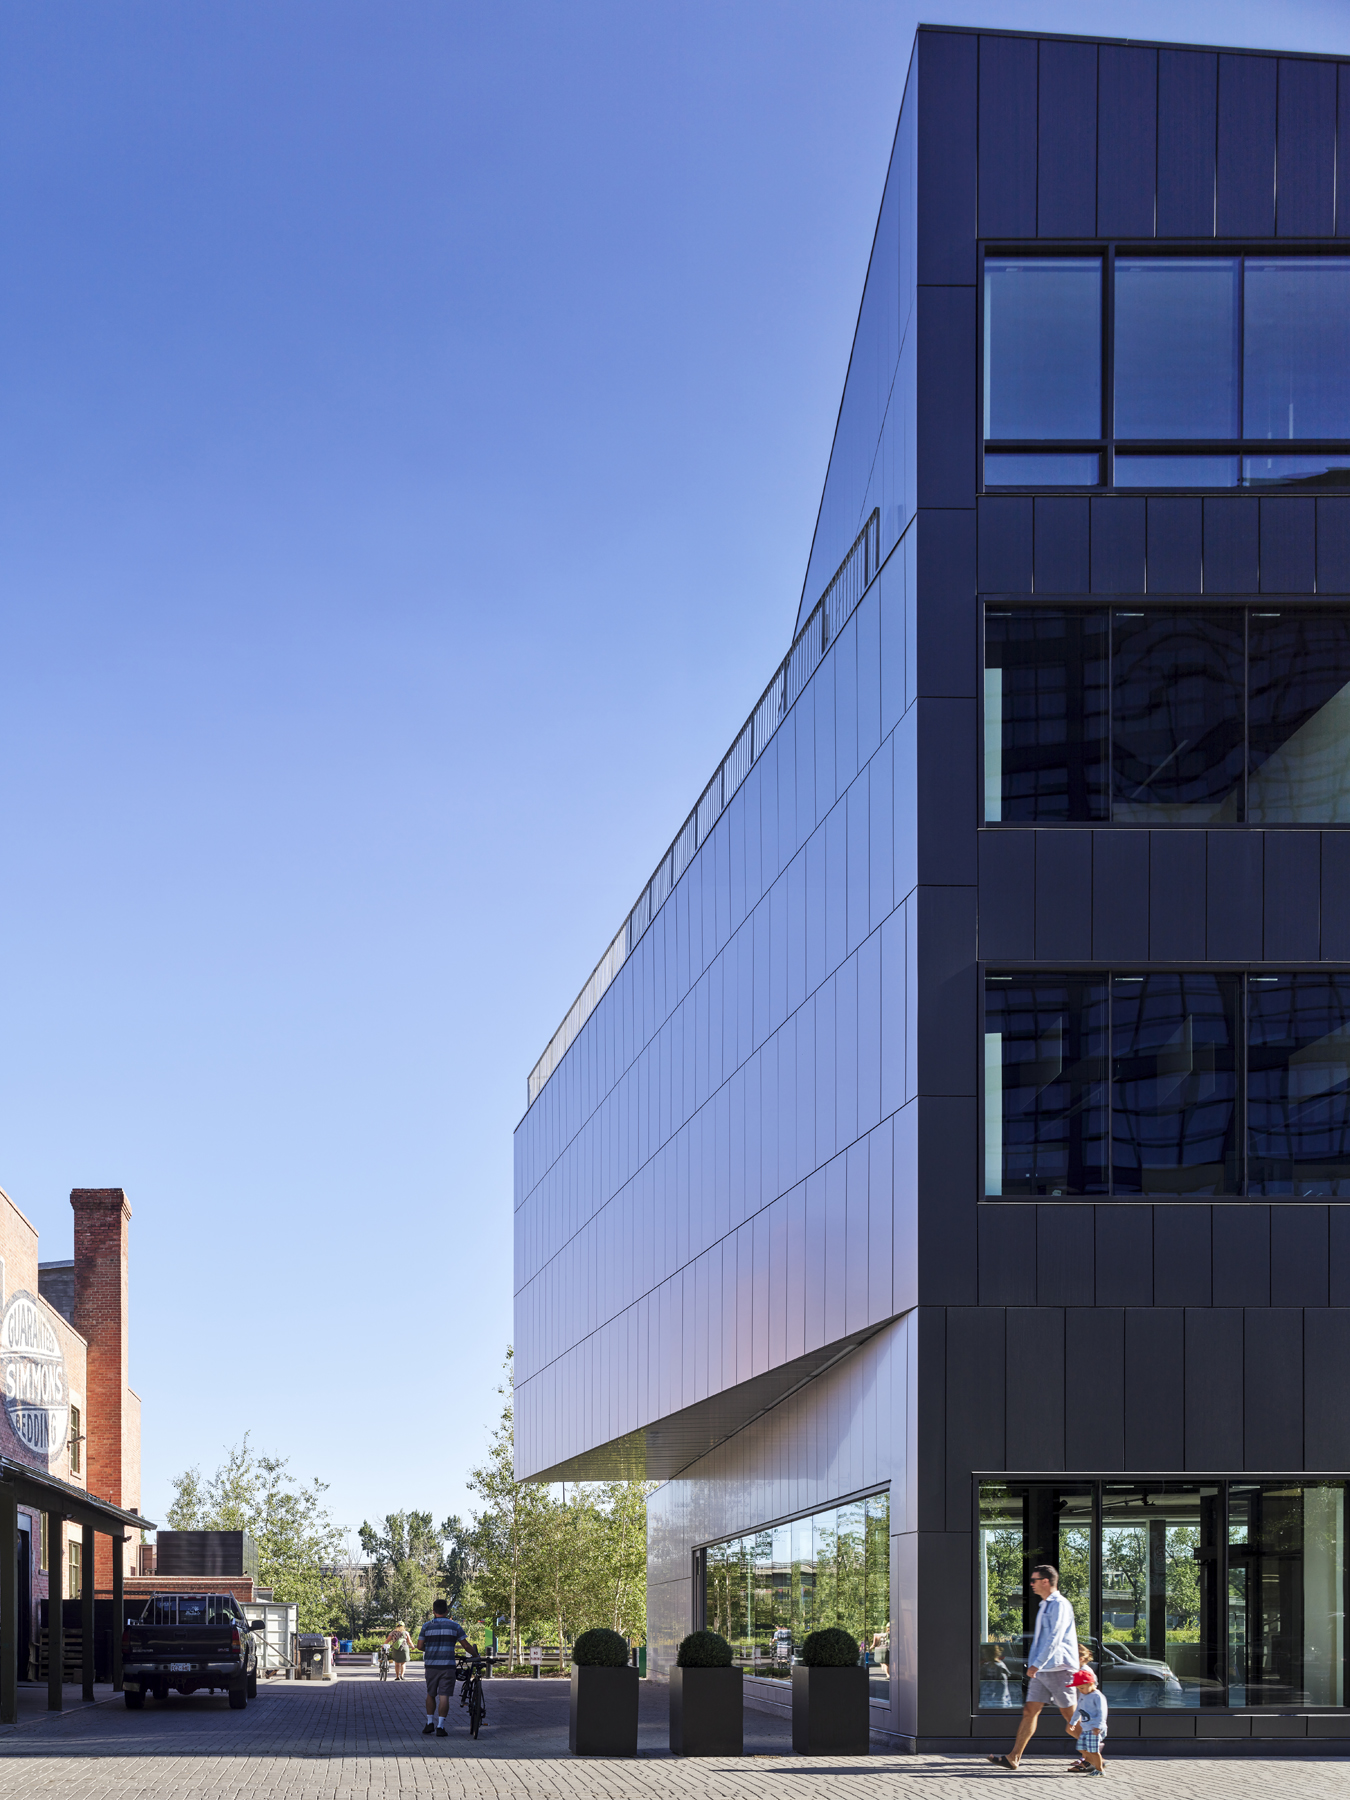 M2 Mixed-Use Building - nARCHITECTS | Eric Bunge, Mimi Hoang